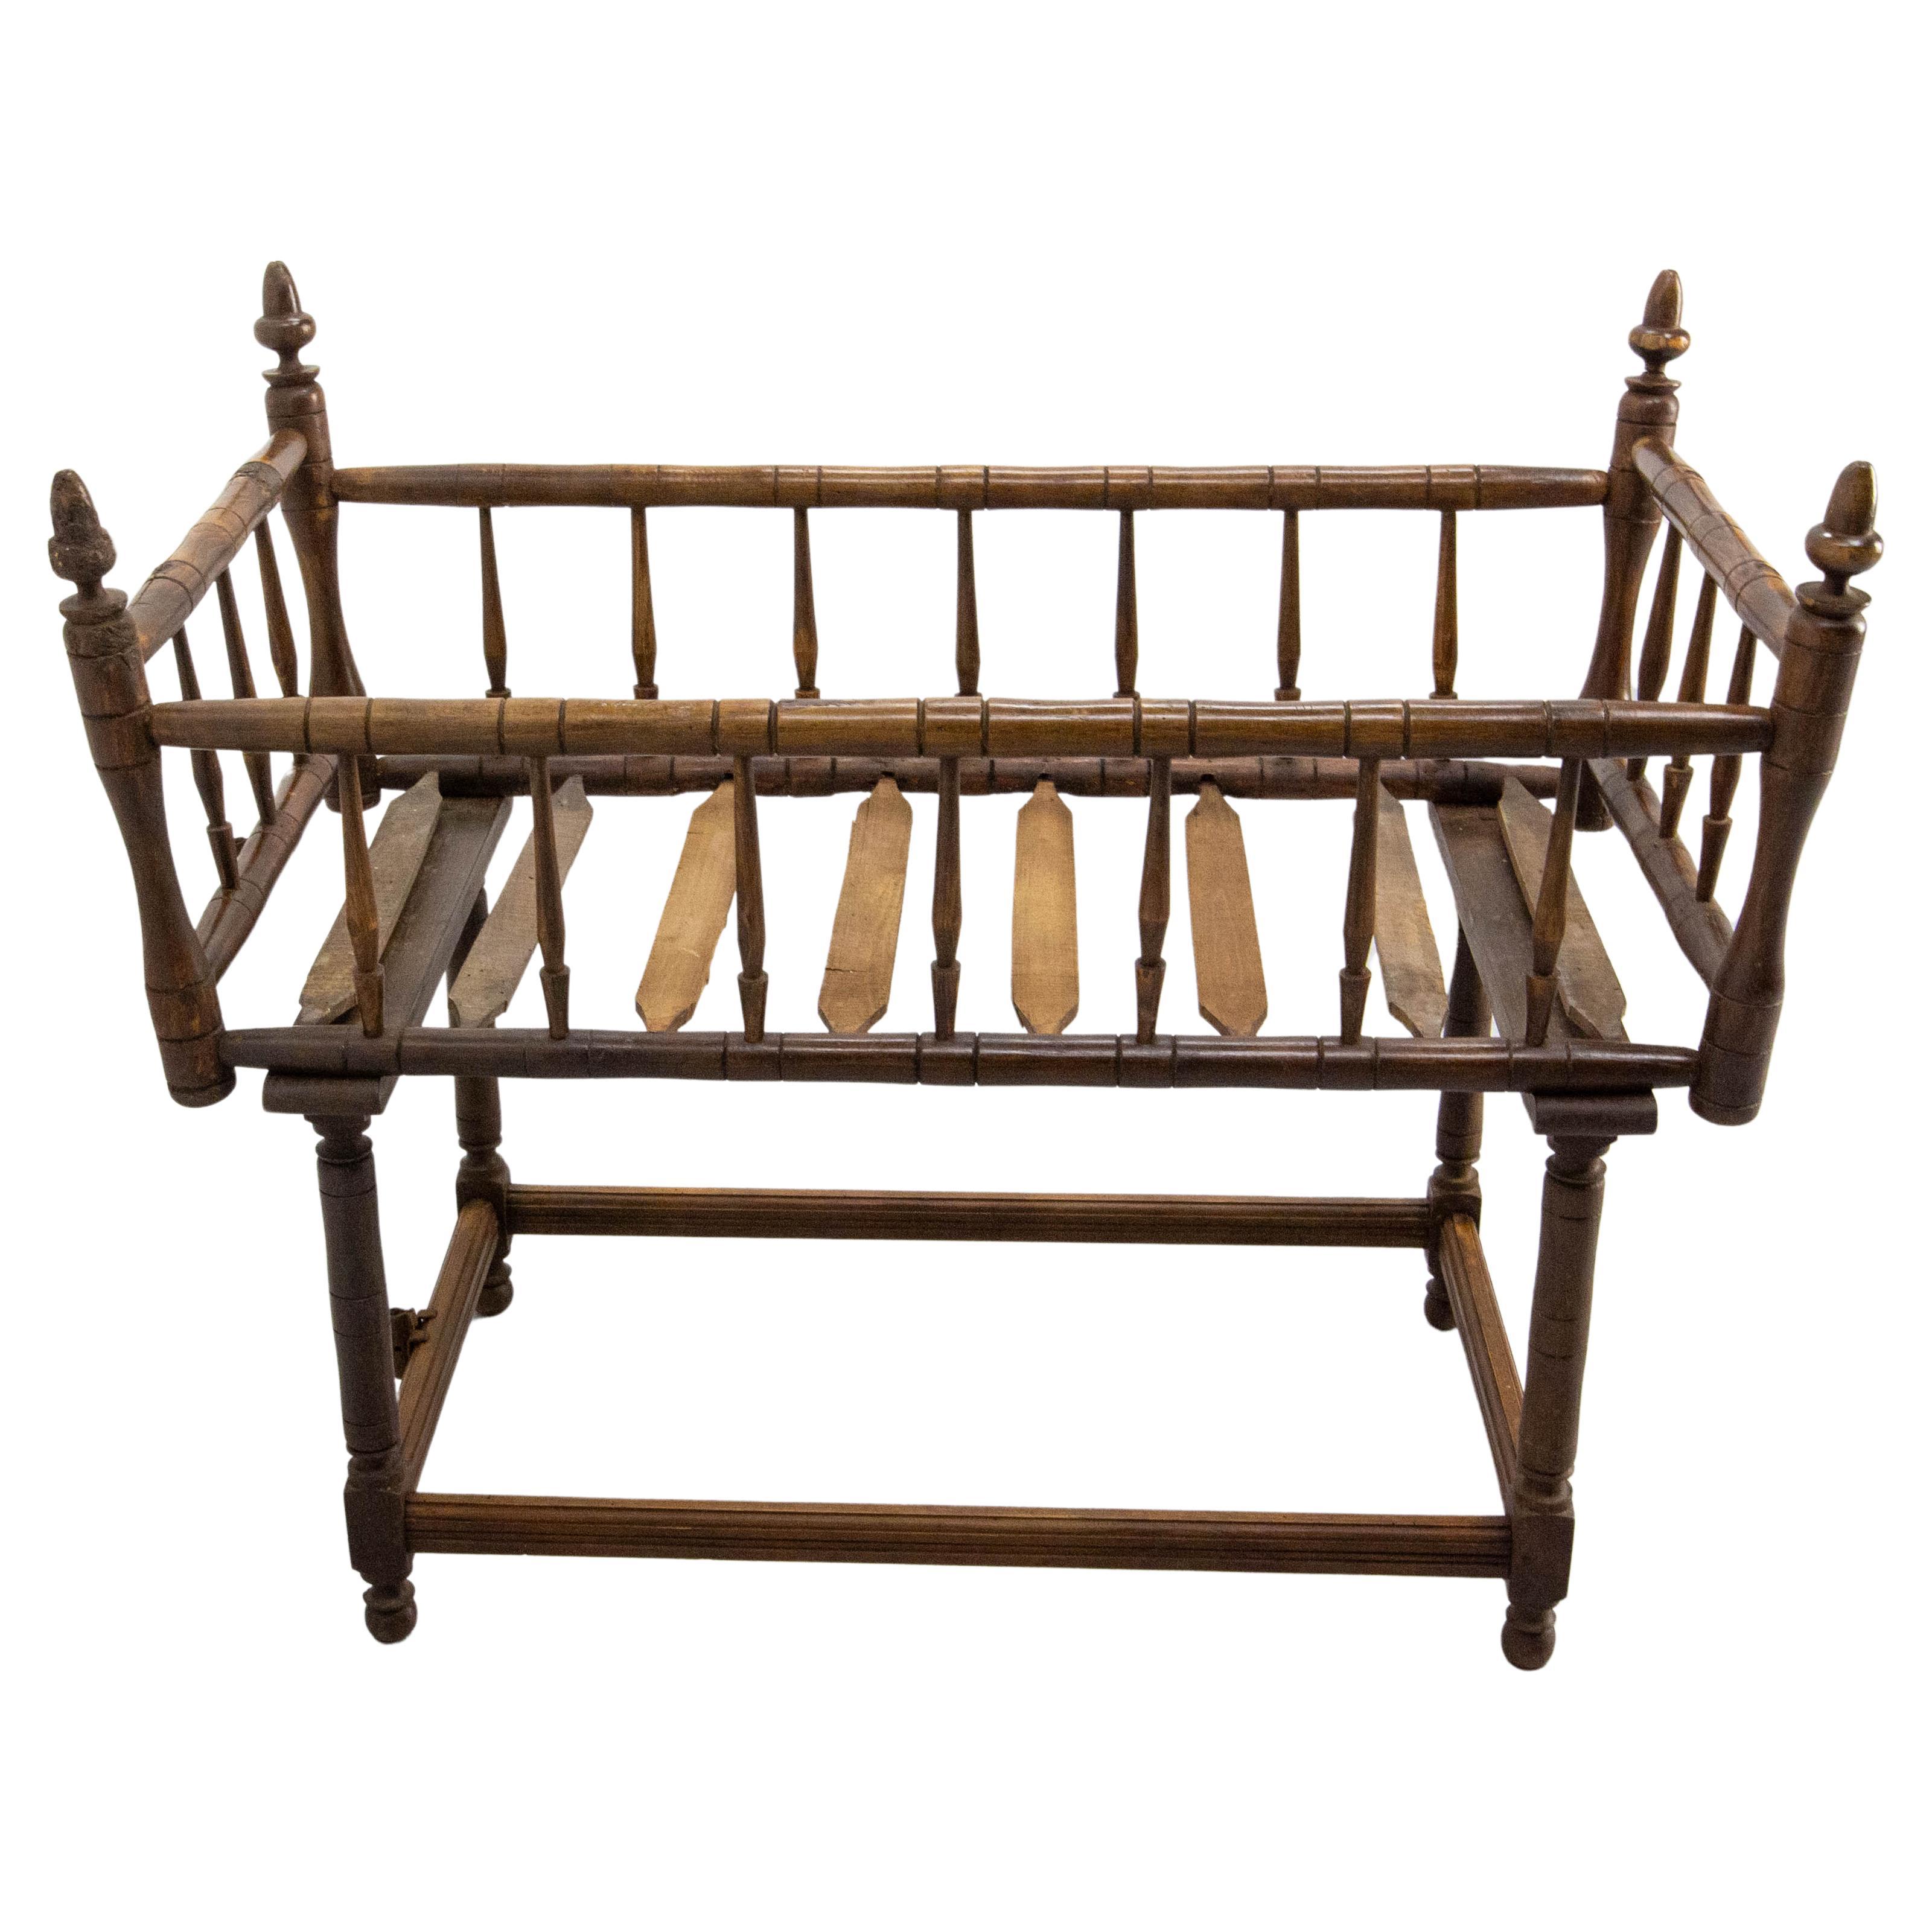 19th Century Toy Chest or Coffer Carved Chestnut Ancient Baby Cradle, French